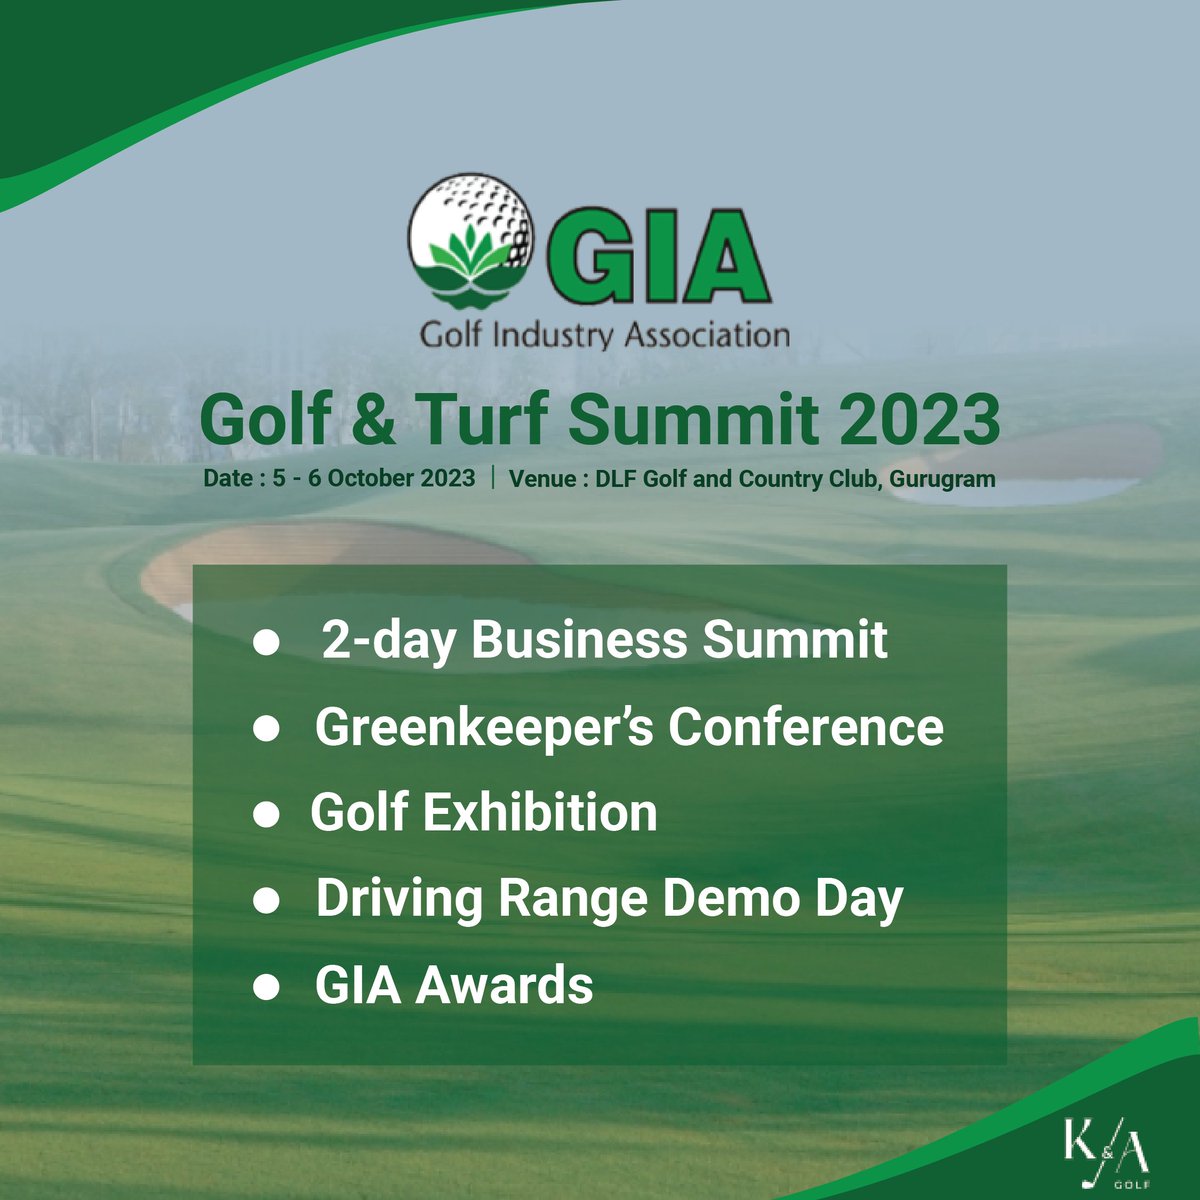 Mark your calendar for the GIA Golf & Turf Summit 2023. Two days of Golfing innovation, Business Strategy and Excellence await! ⛳️

.

.

.

.
#GIASummit2023 #GIA #GIASummit #GIAGolfSummit #GolfIndustryAssociation #golfevent #golfindia